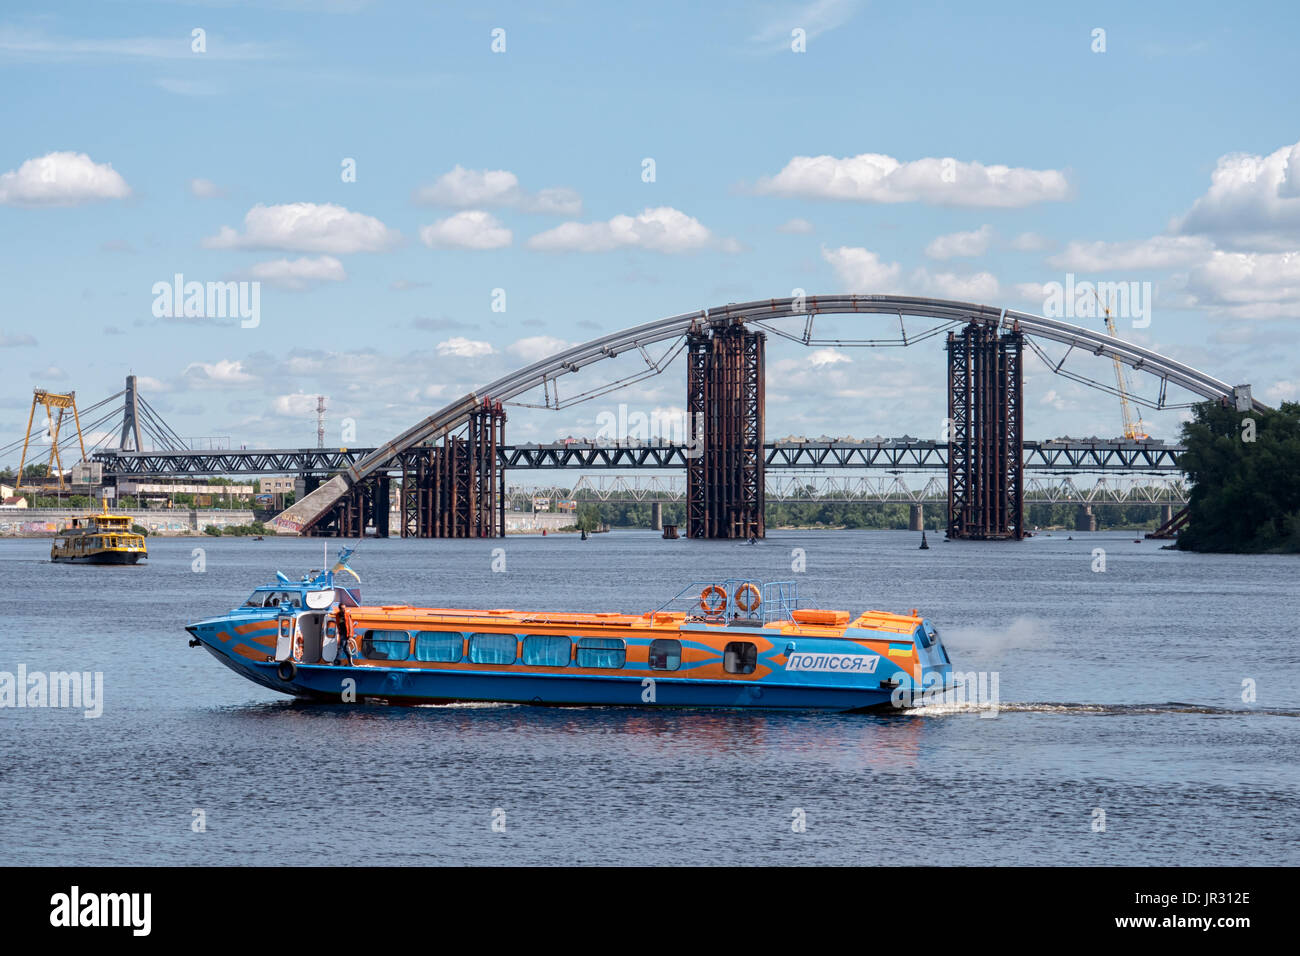 KYIV, UKRAINE - JUNE 12, 2016:  Tourist Excursion boat on the Dnieper (Dnipro) River with the Podilsko-Voskresensky Bridge in the background Stock Photo